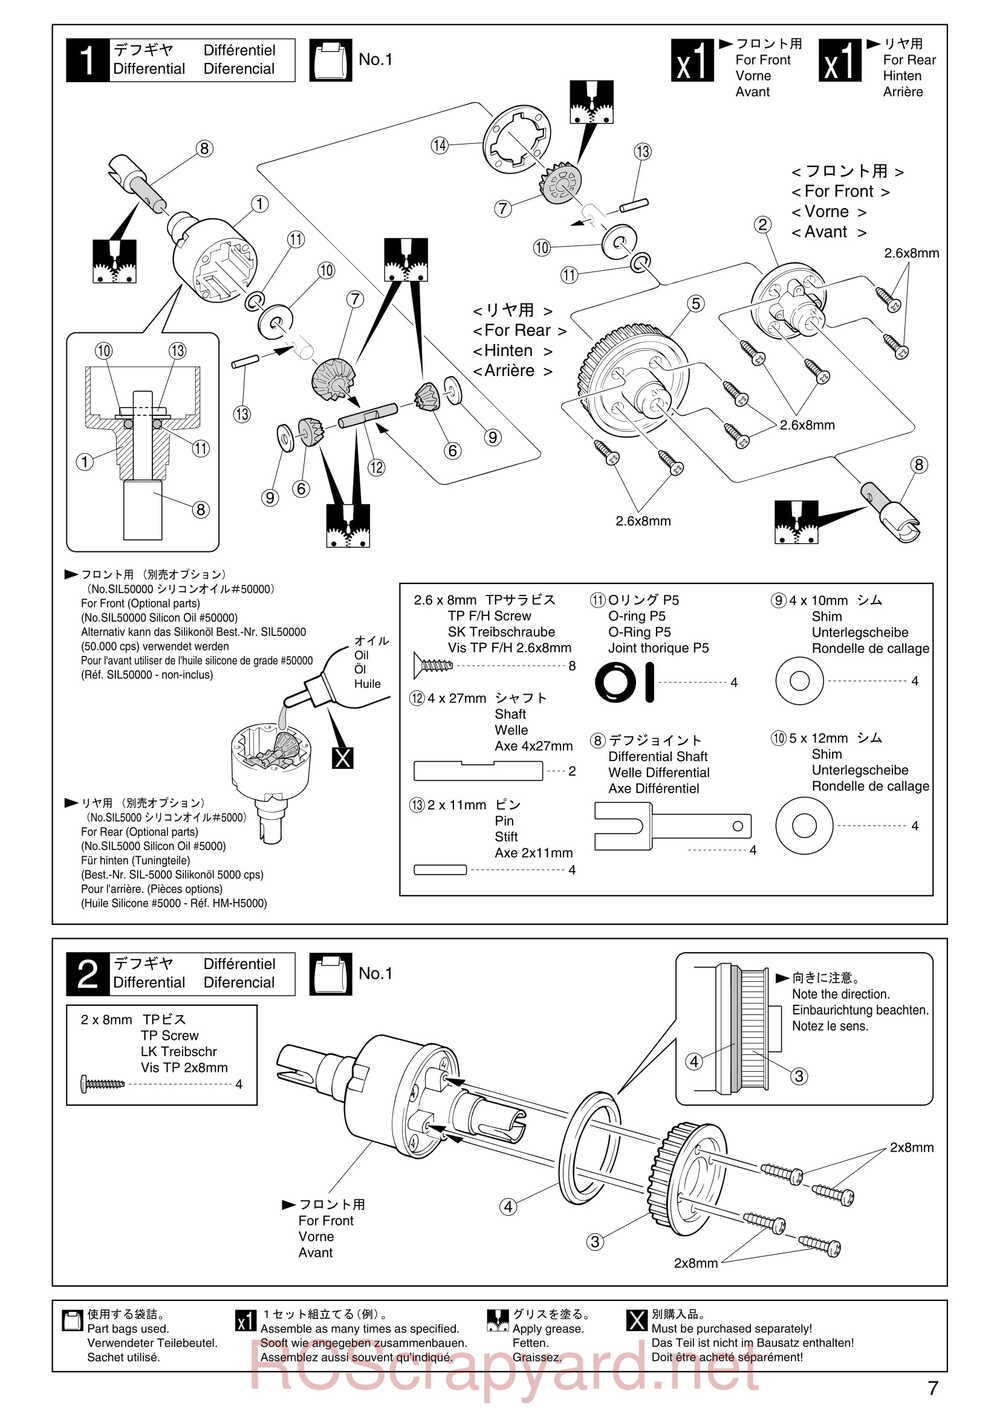 Kyosho - 31122 - V-One S2 - Manual - Page 07